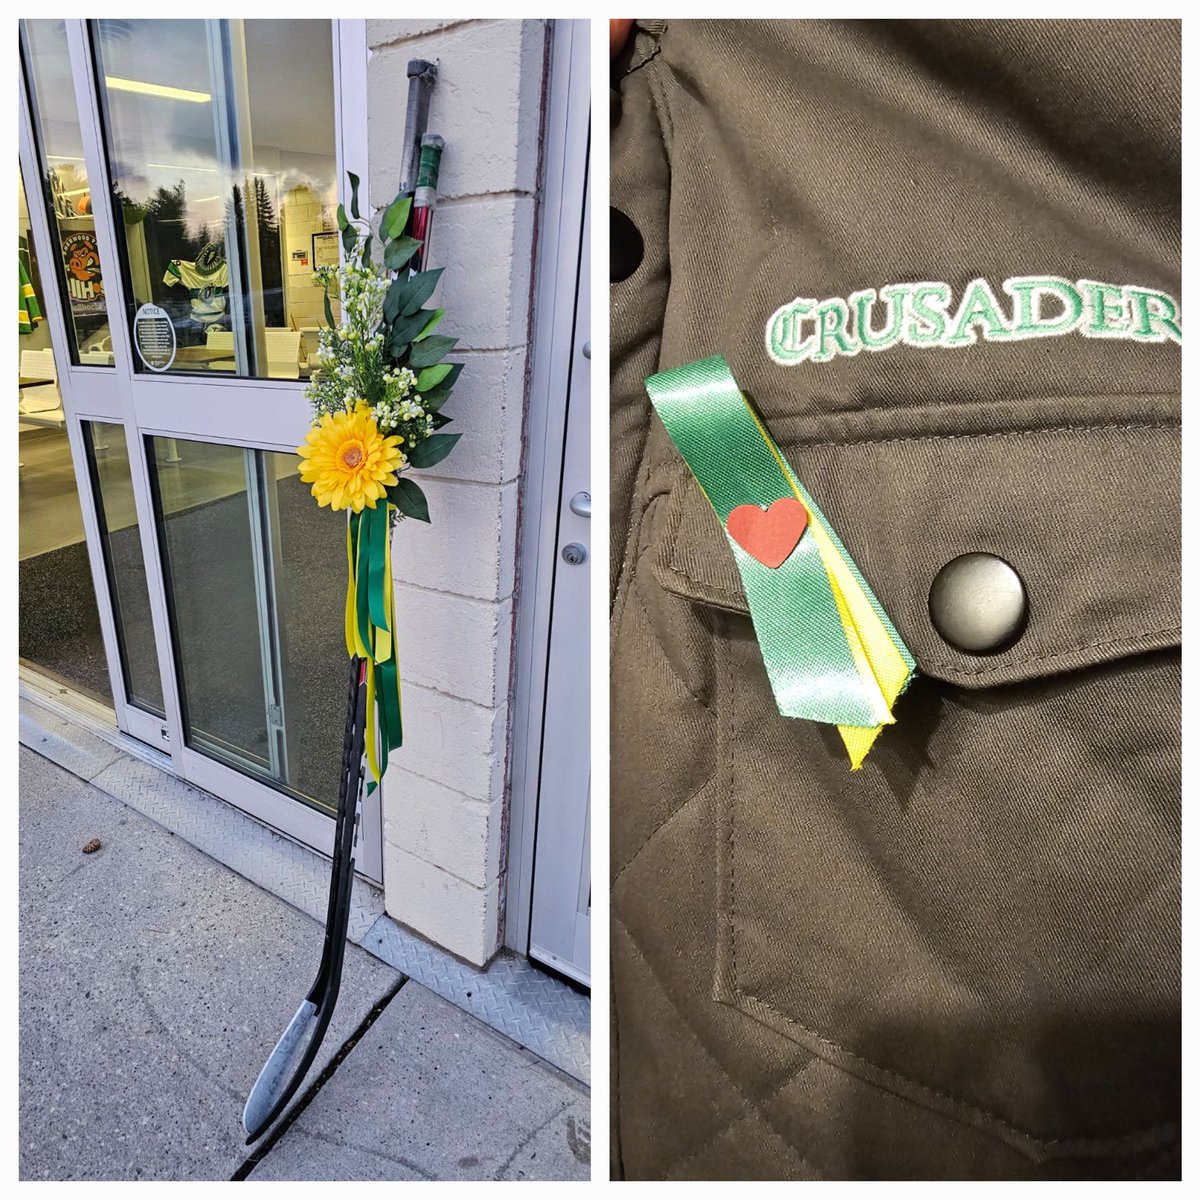 The gussying up of the hockey sticks, the lapels Crusaders staff and volunteers were wearing, all thanks to the heart and skills of @PaigeMatlock. #ThankYou #SticksOutForHumboldt